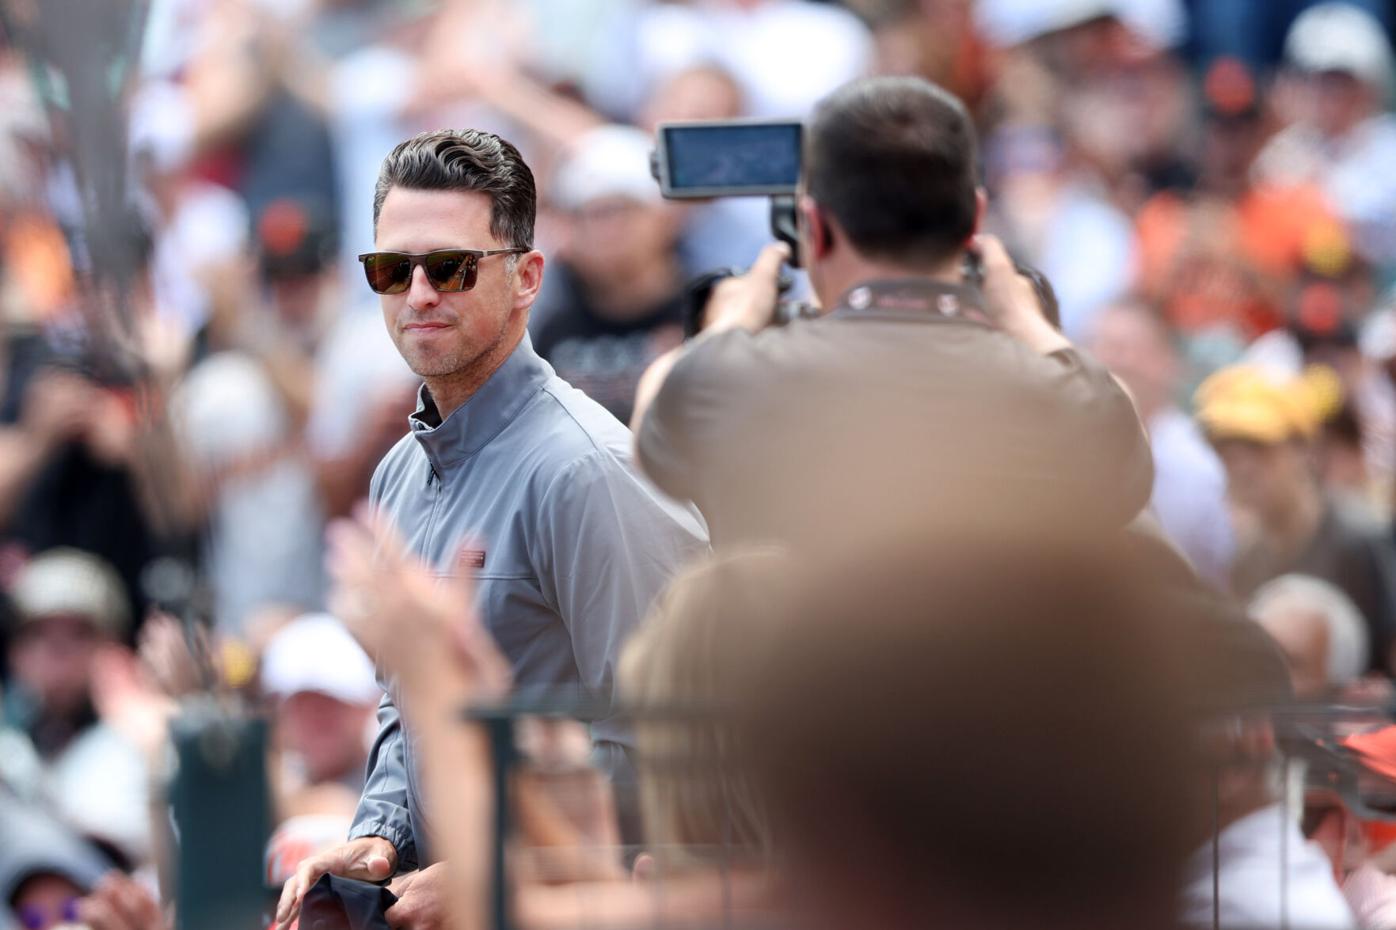 Could Buster Posey be Giants future manager? Not likely.